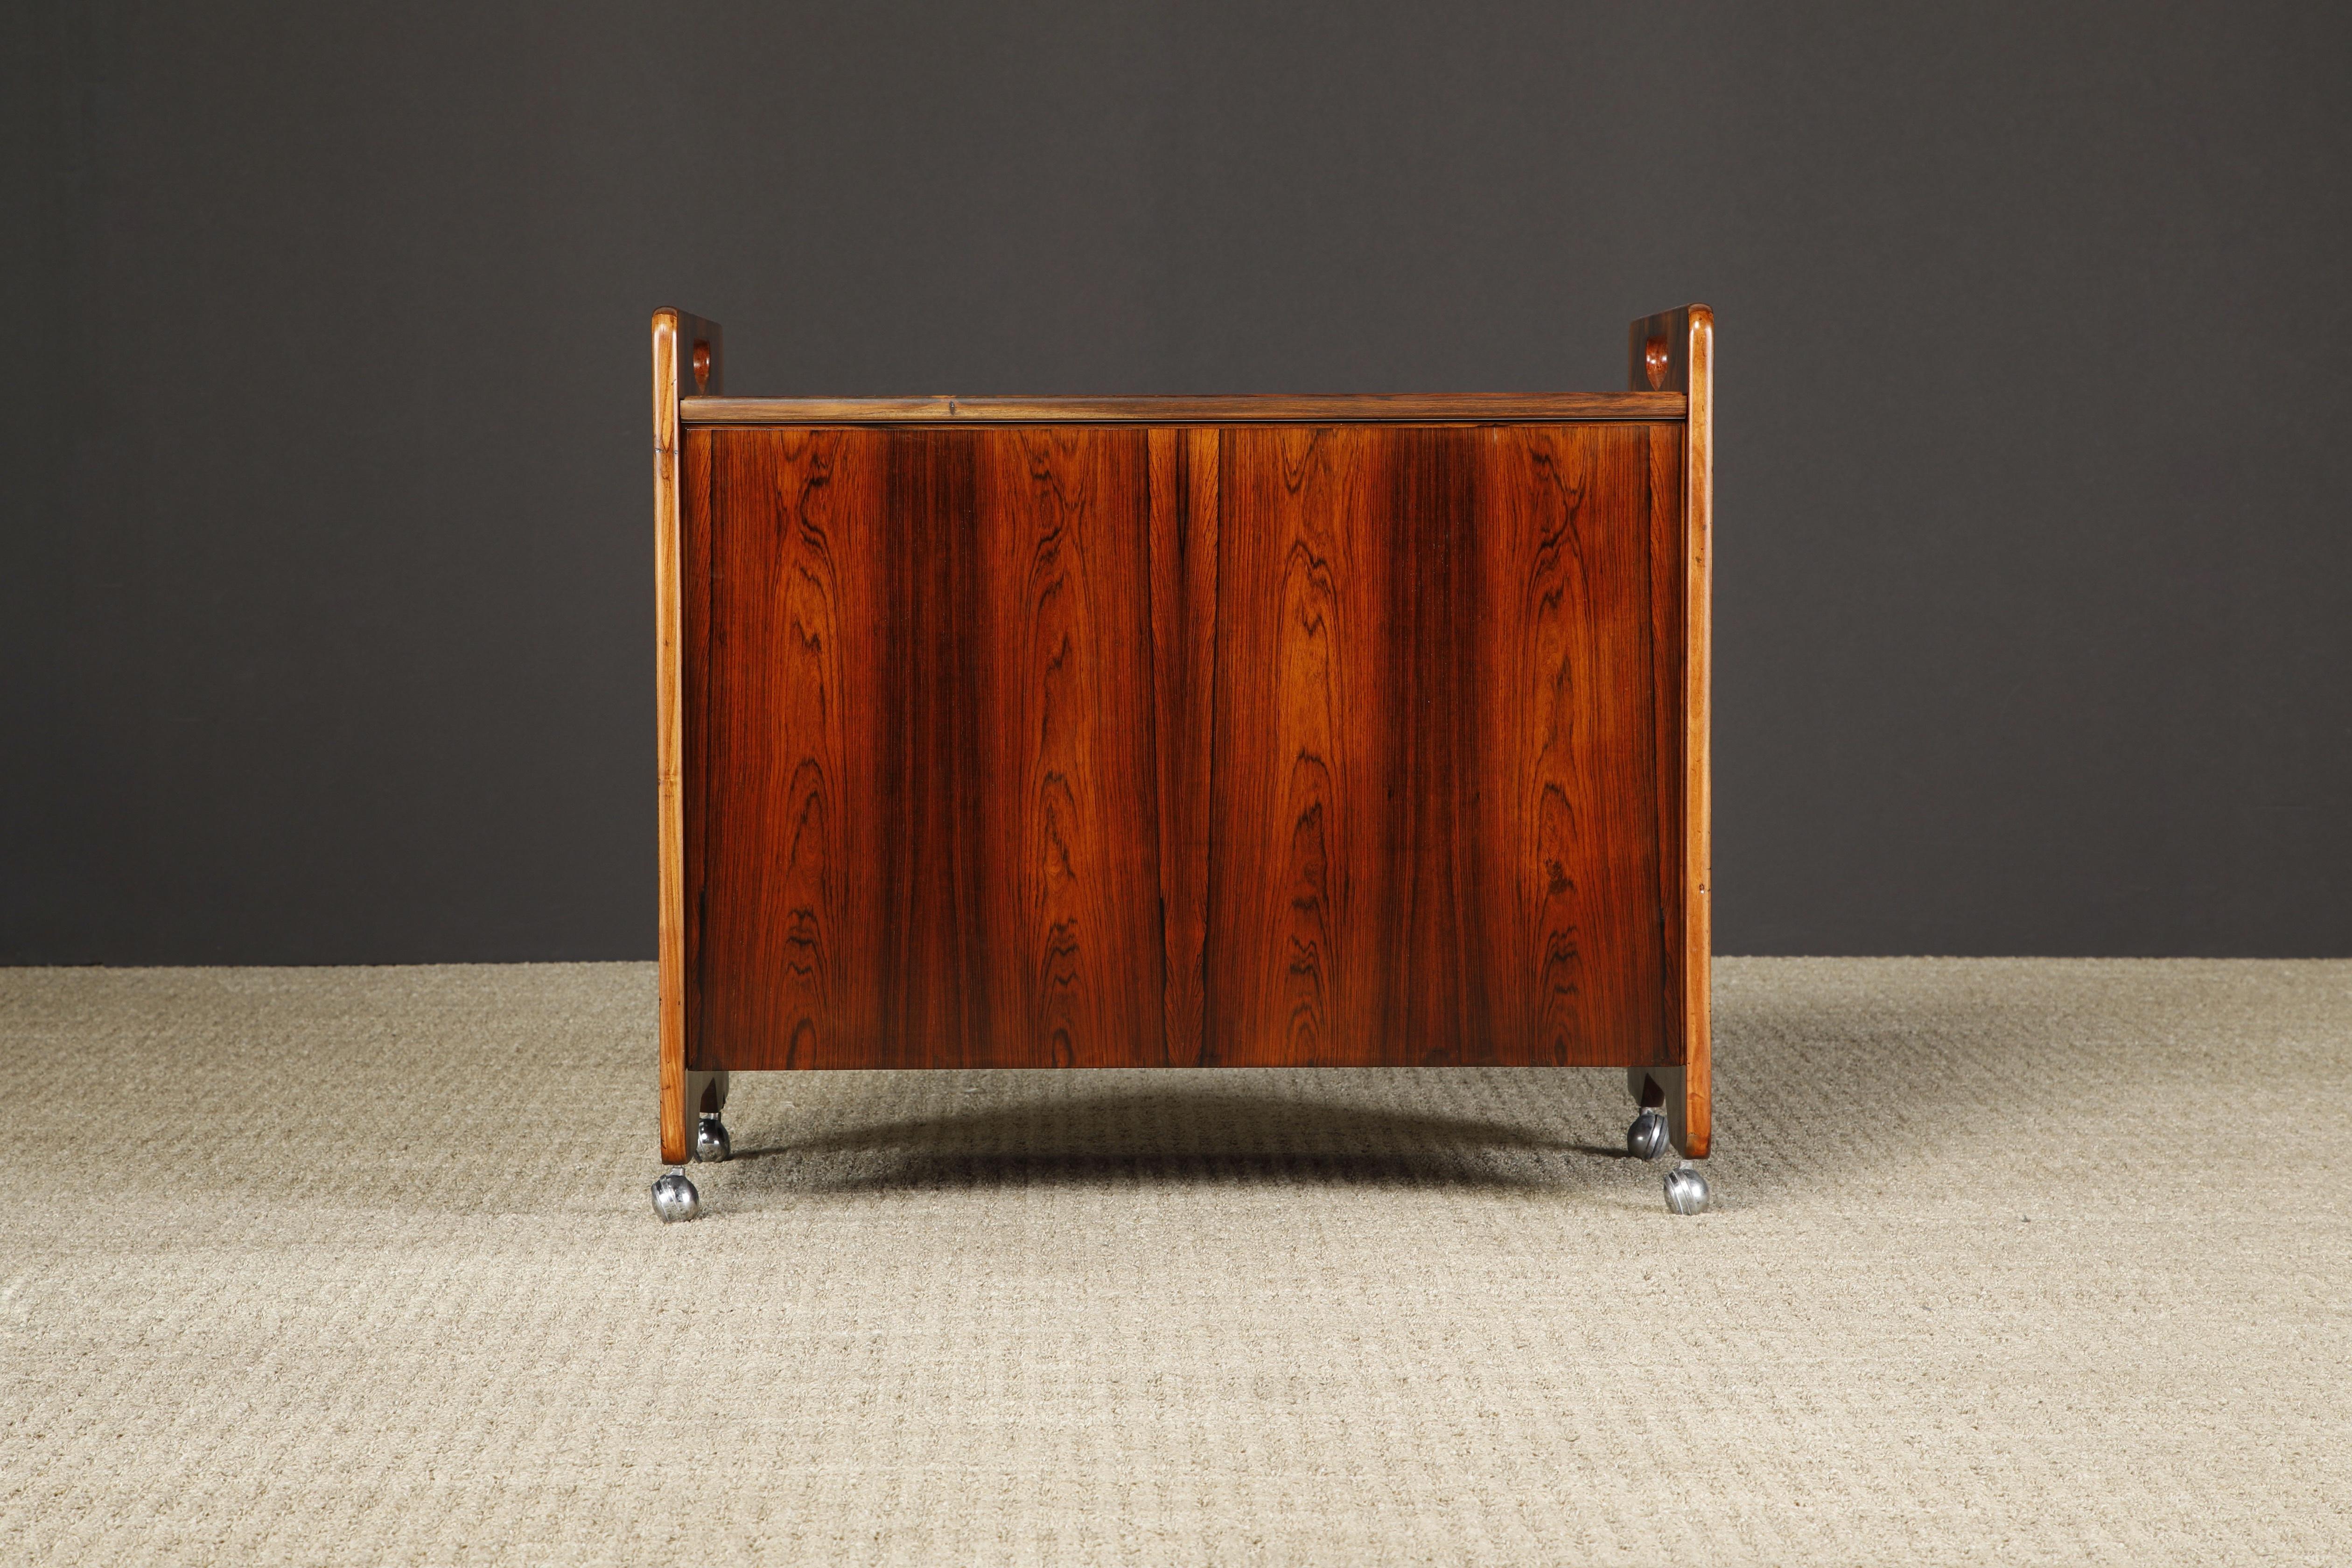 This innovative bar cart by Sergio Rodrigues was crafted in circa 1960 from Brazilian Rosewood with contrasting white formica interior, made in Brazil and recently imported to the states. Fully restored and ready to be used and cherished